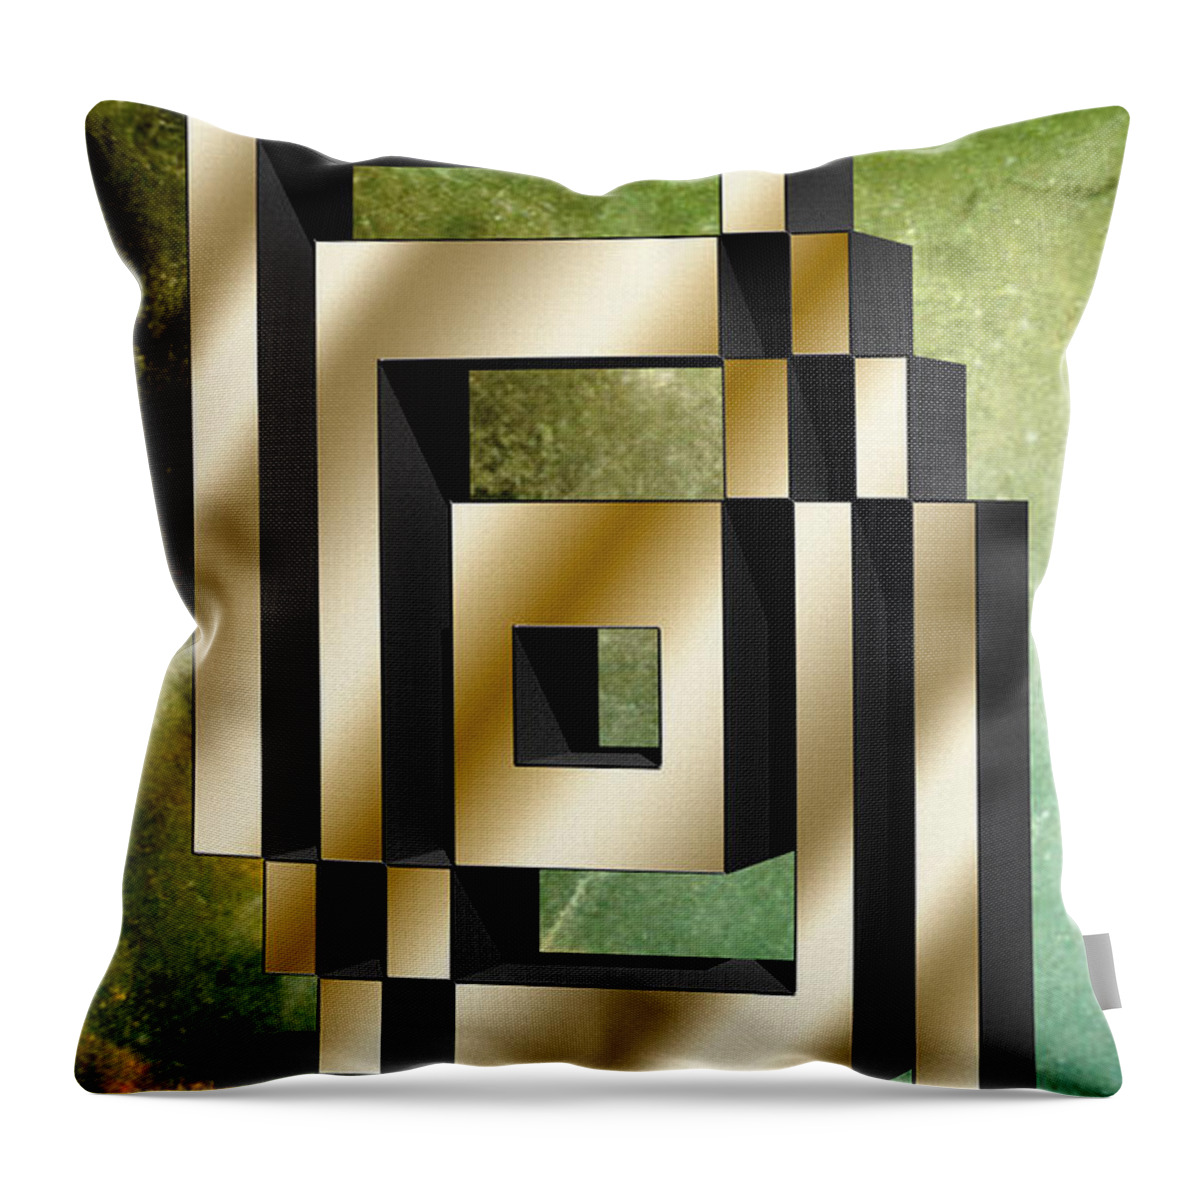 Staley Throw Pillow featuring the digital art Vertical Design 6 by Chuck Staley